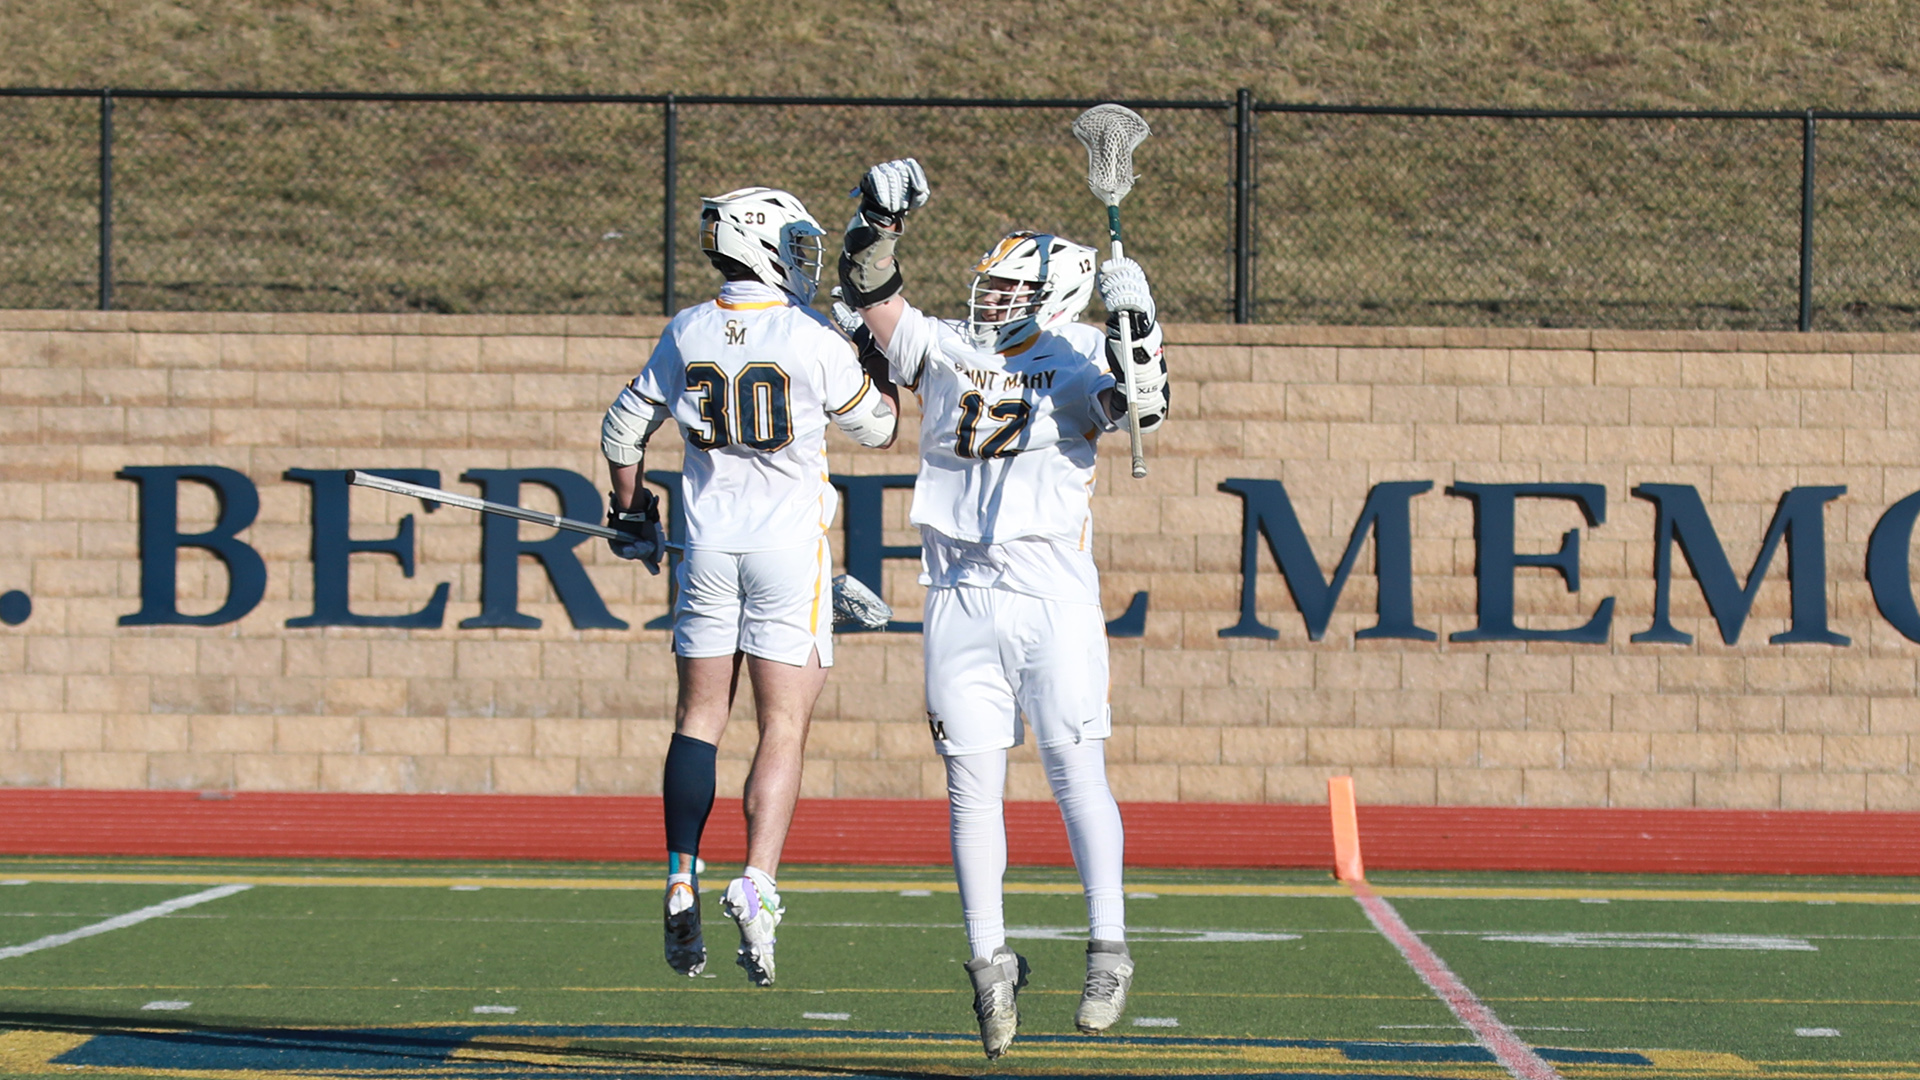 Haynes Has Four Goals in Win Over Moval